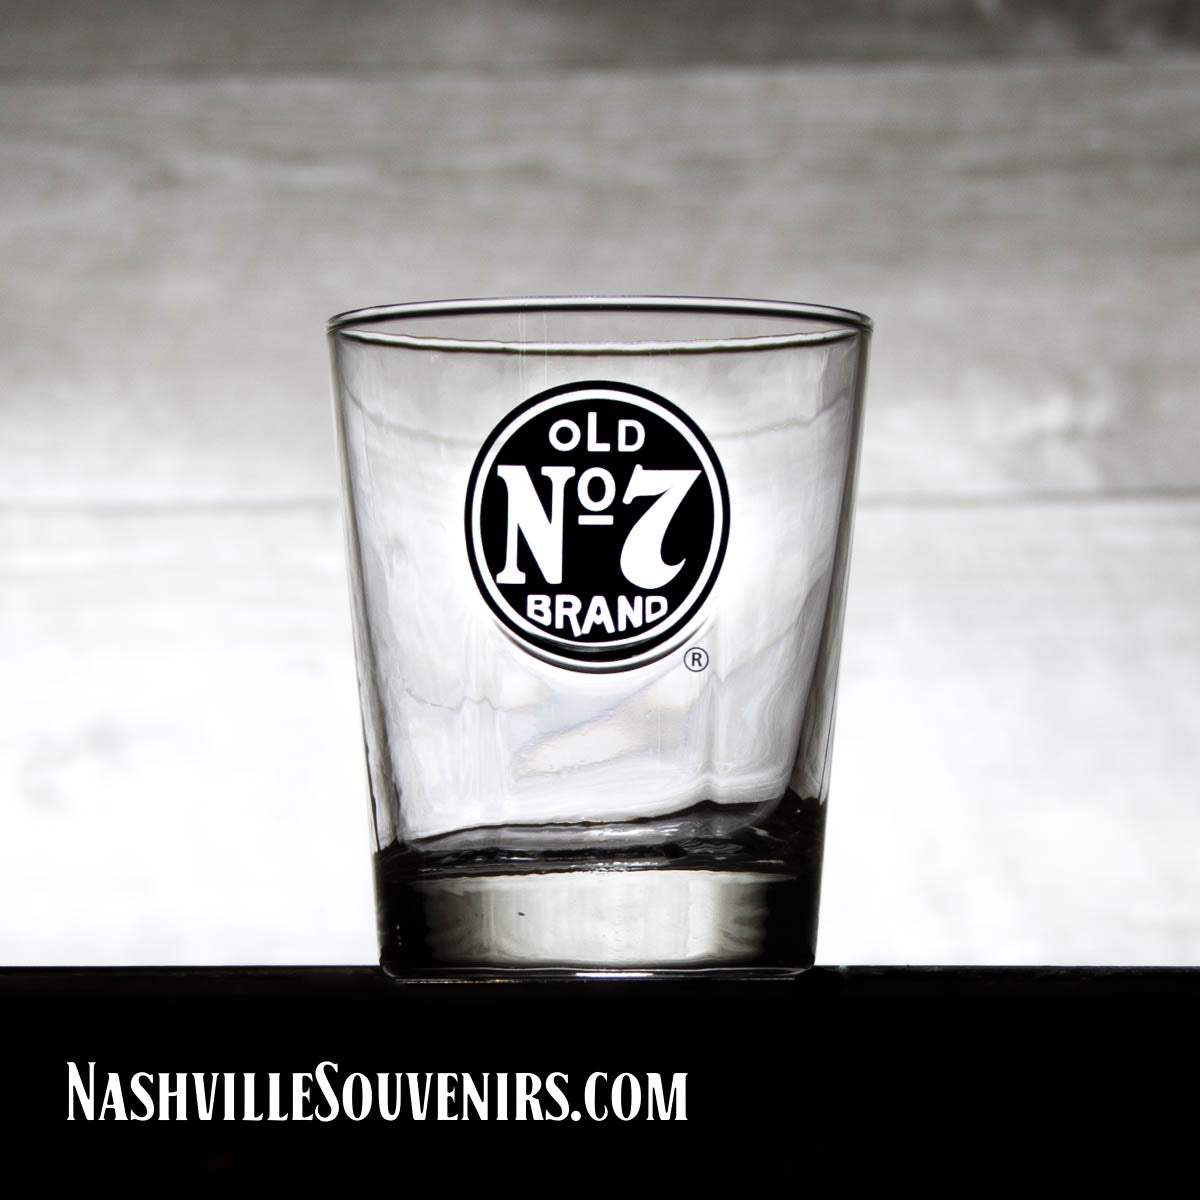 Officially licensed Jack Daniels "Old No7 Brand" Event Rocks Glass. This DOF glass stands 4" high and holds 10 ounces of that great Jack Daniel's Black Label Tennessee whiskey. It makes a great gift for Jack Daniels fans everywhere.